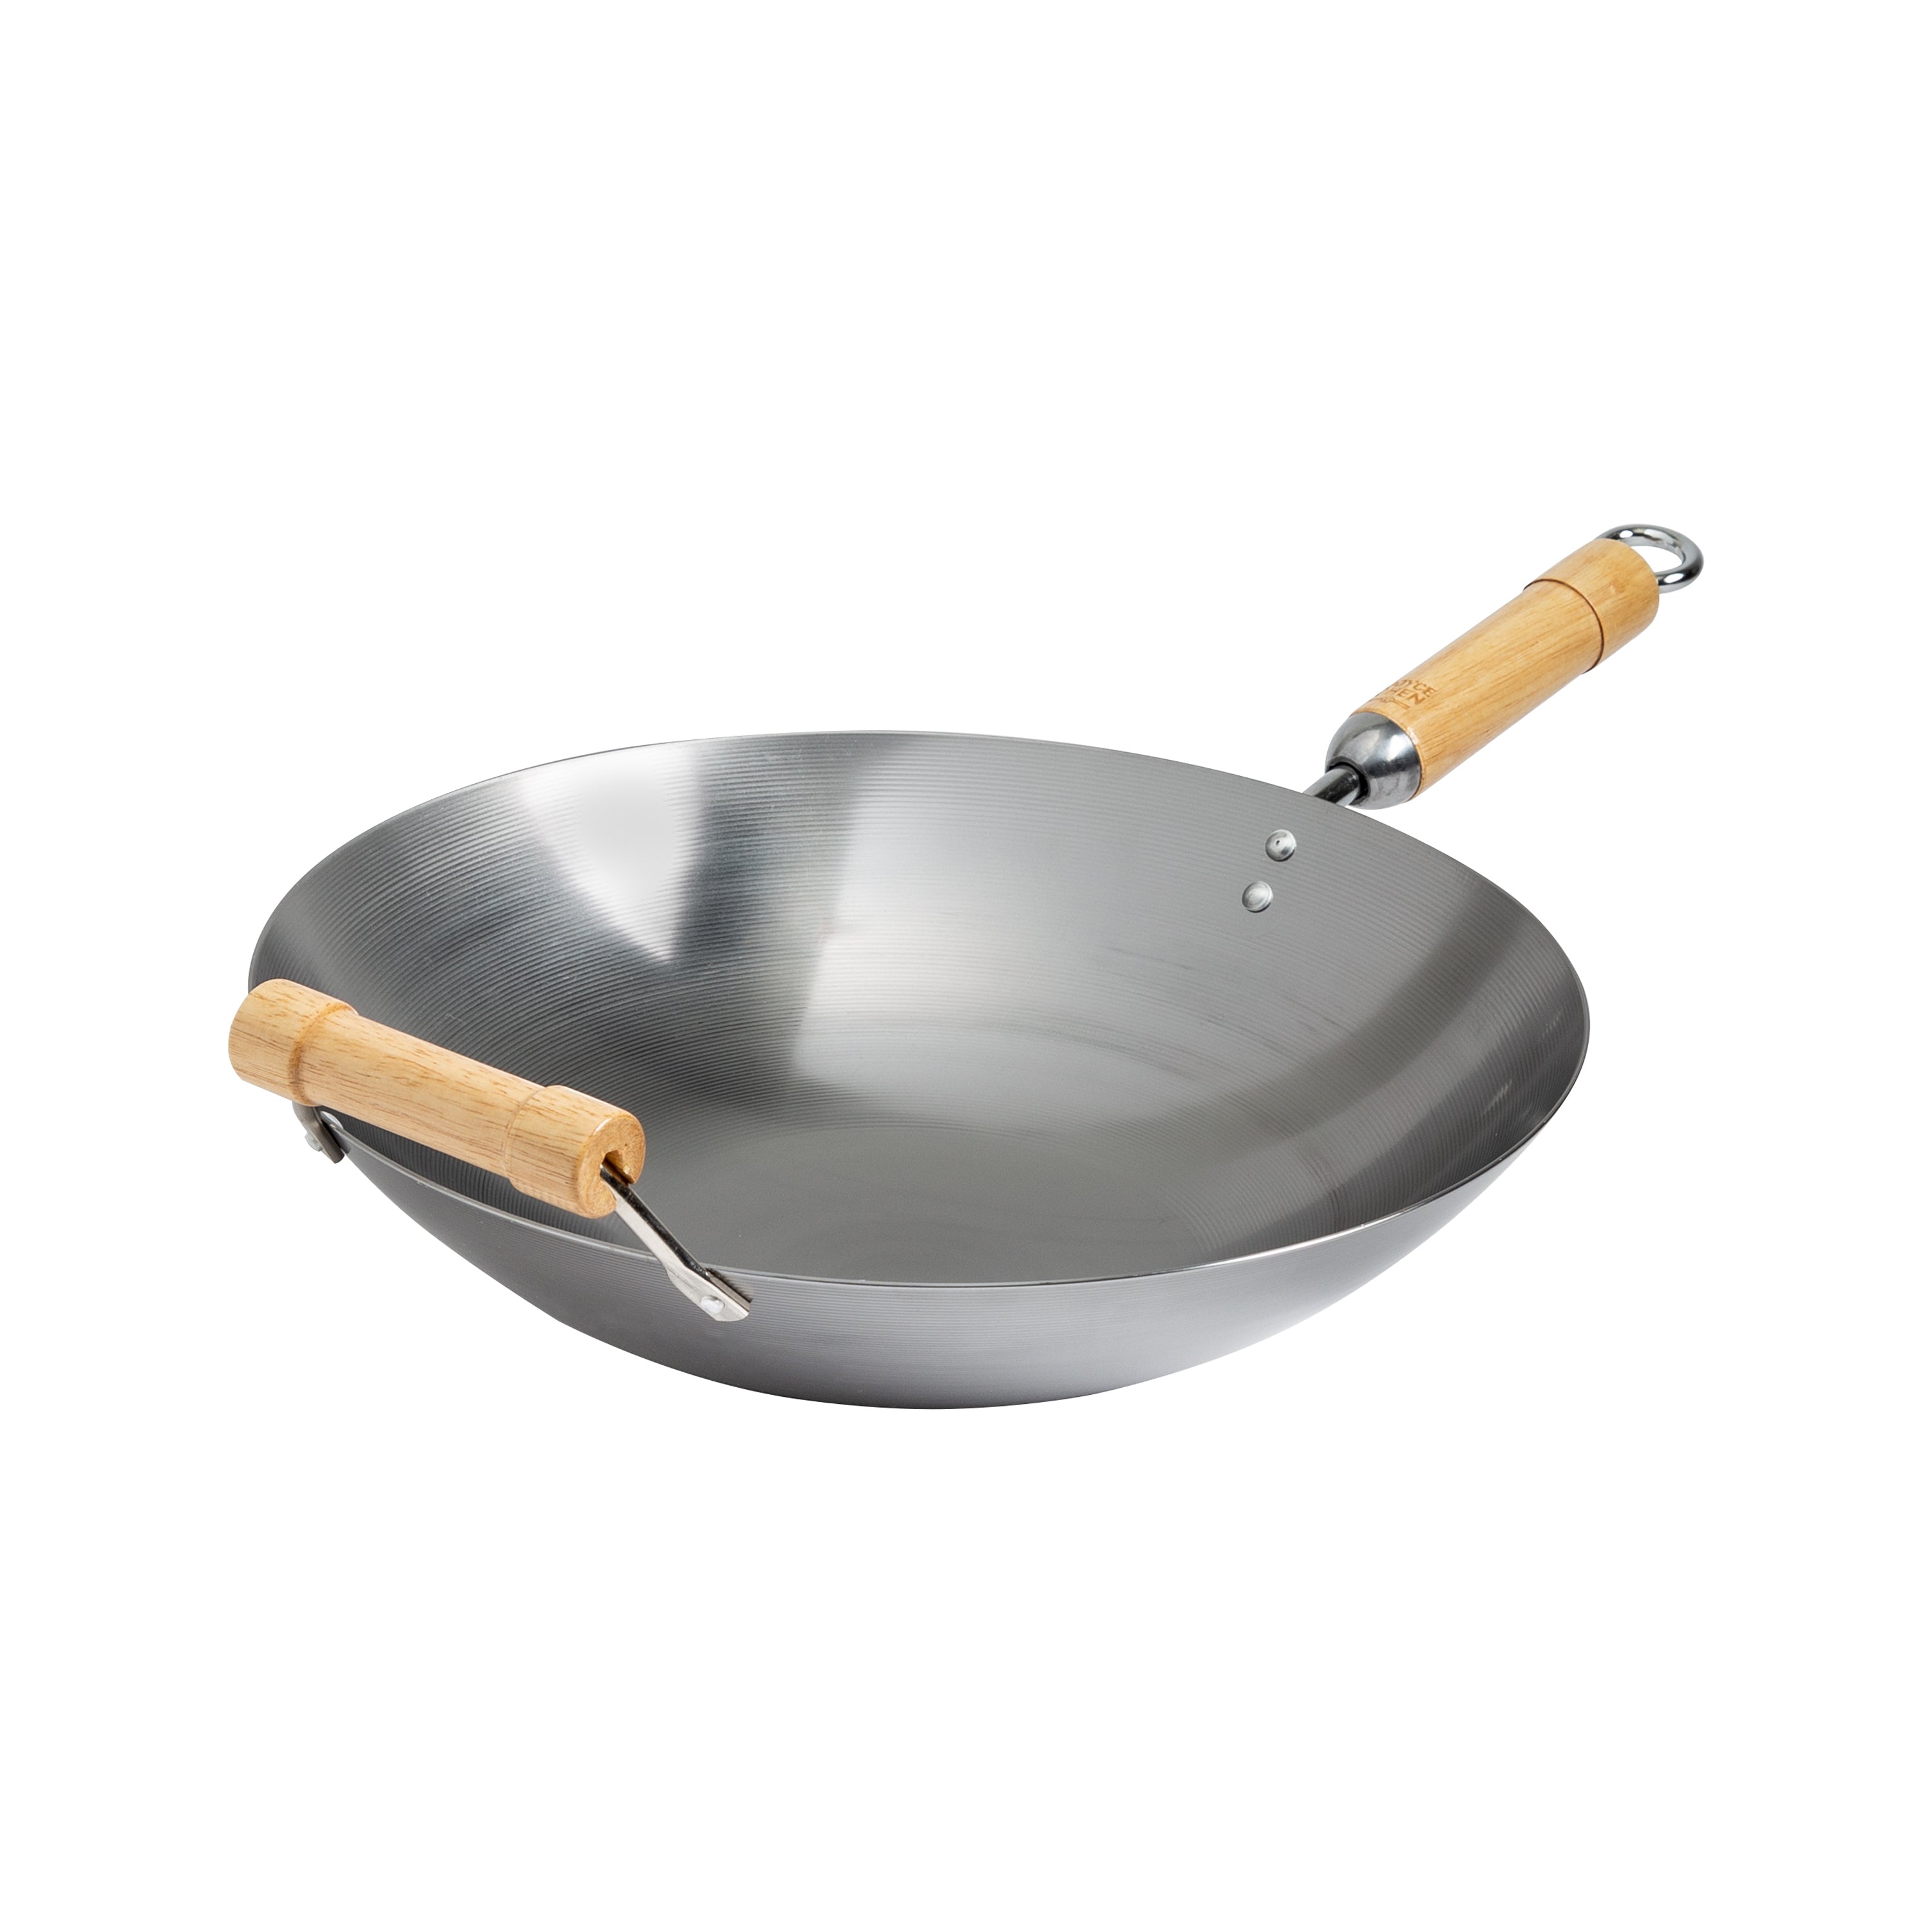 14-Inch Wok with Side Handles – Anolon